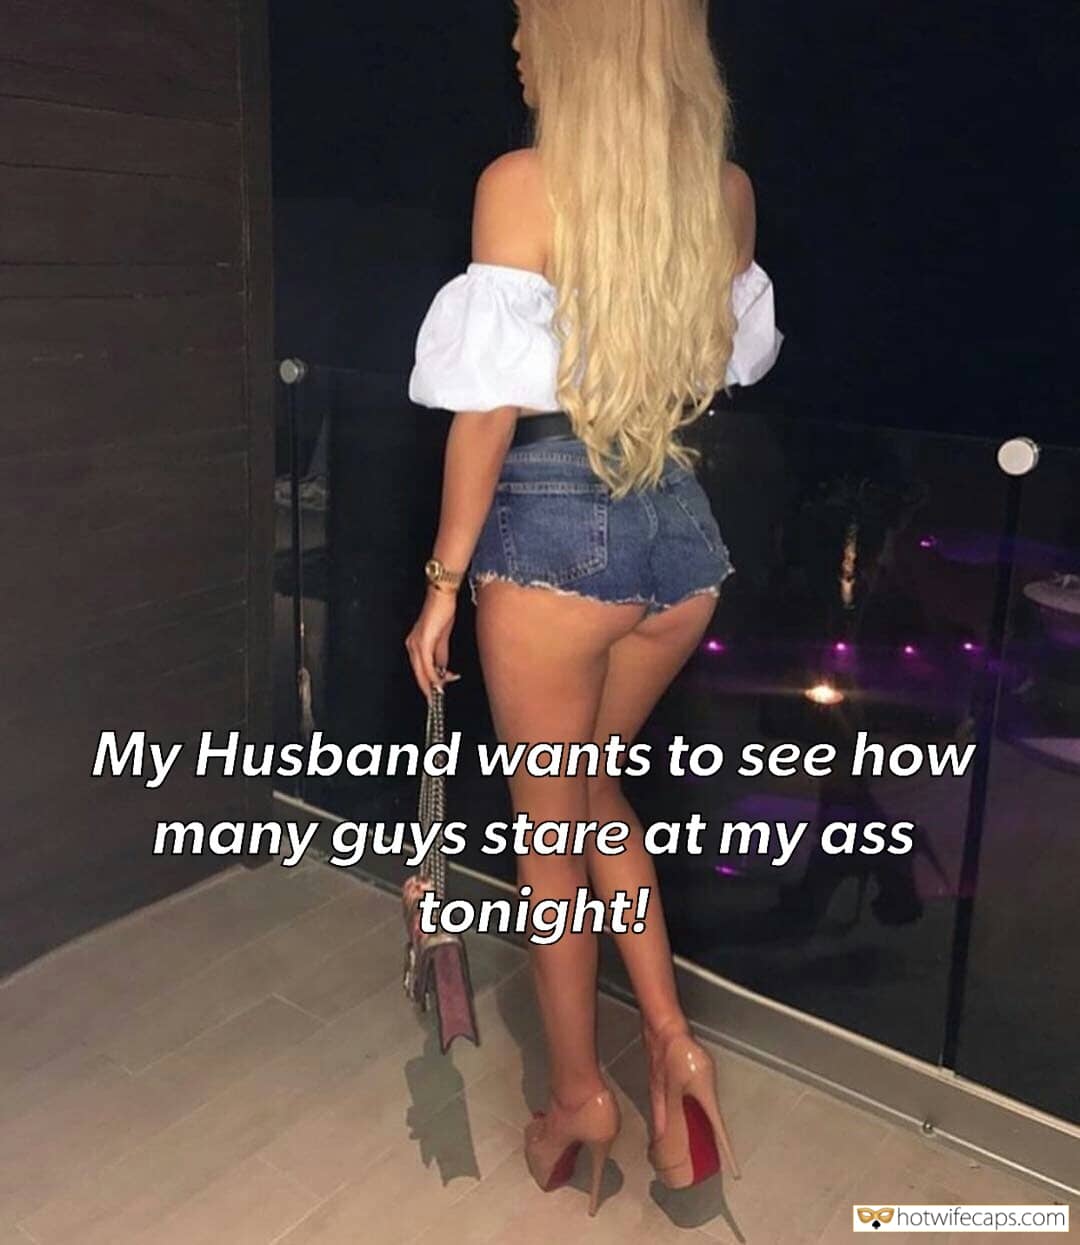 Curvy Trannys Sucked Porn Captions - My Favorite Hotwife Caption â„–558926: Allow other man to grab them too